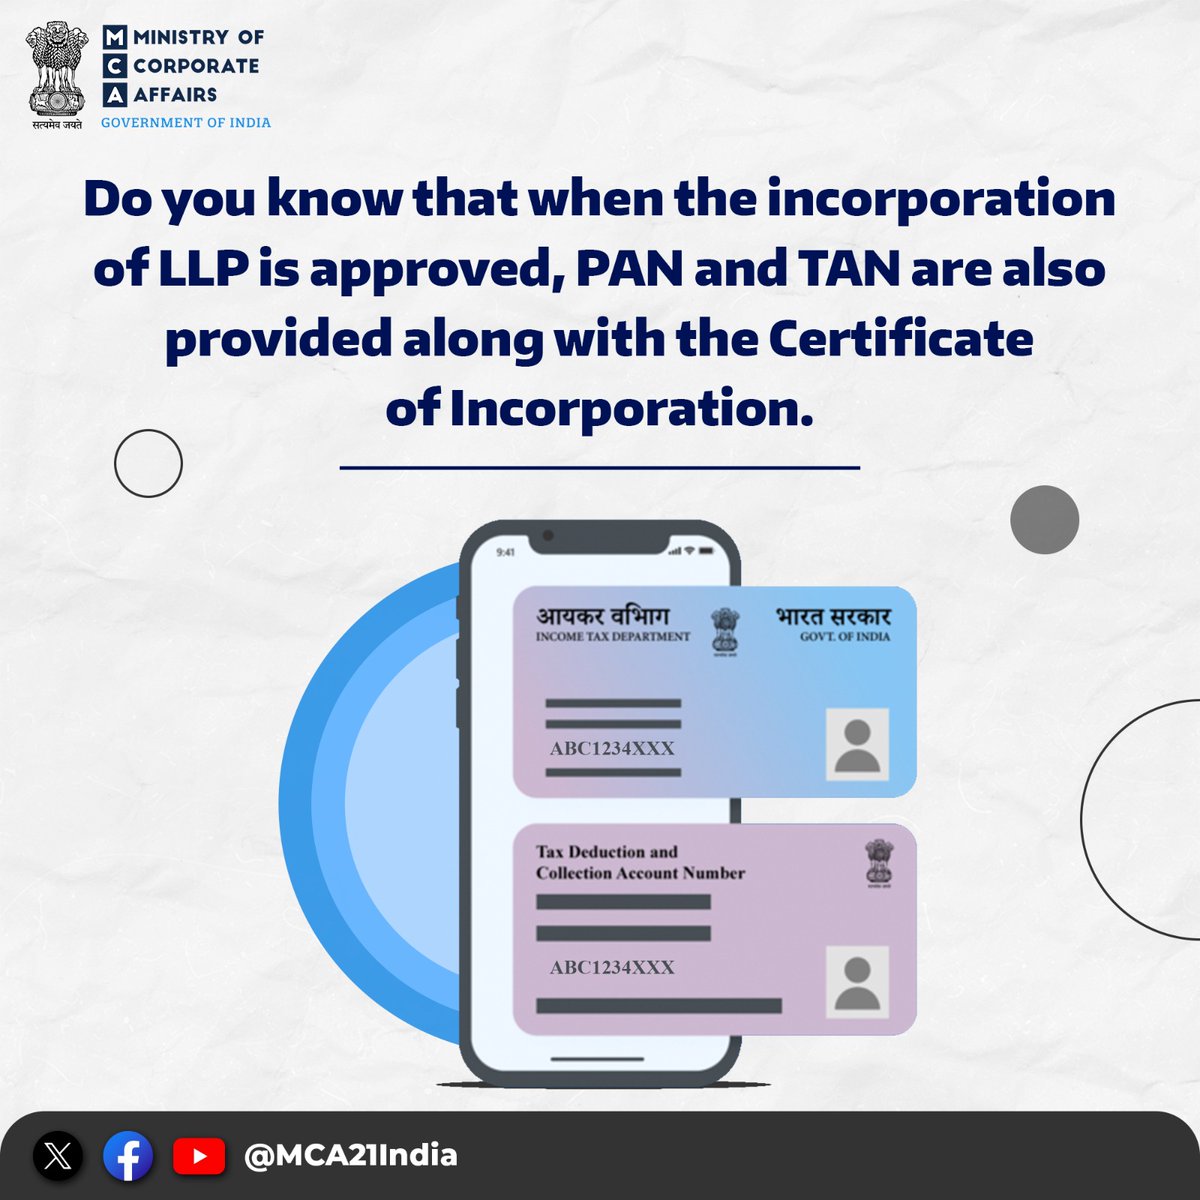 LLP incorporation – Do you know that alongside the Certificate of Incorporation, you also receive PAN and TAN for your venture? Simplifying the path to success, one detail at a time. #EaseOfDoingBusiness #LLP #Incorporation #PAN #TAN